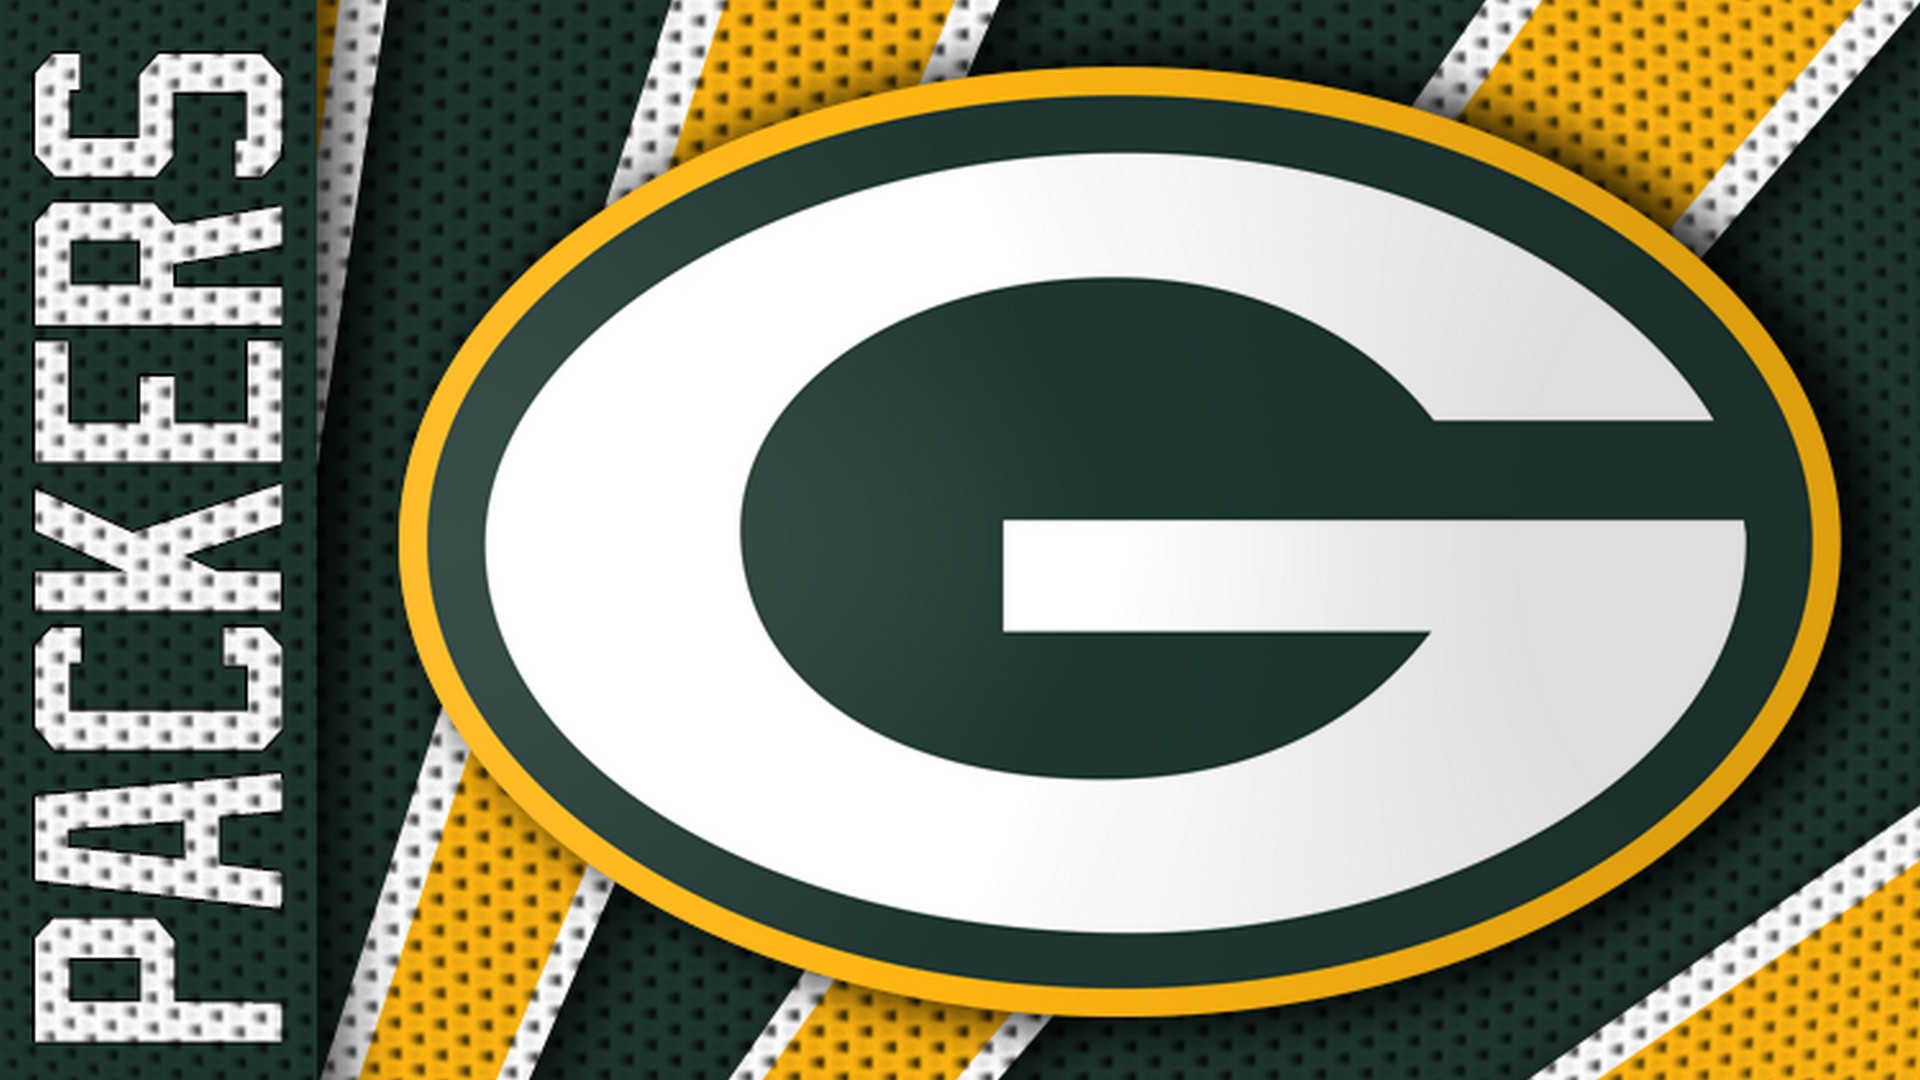 Wallpapers HD Green Bay Packers Logo With high-resolution 1920X1080 pixel. You can use this wallpaper for your Mac or Windows Desktop Background, iPhone, Android or Tablet and another Smartphone device